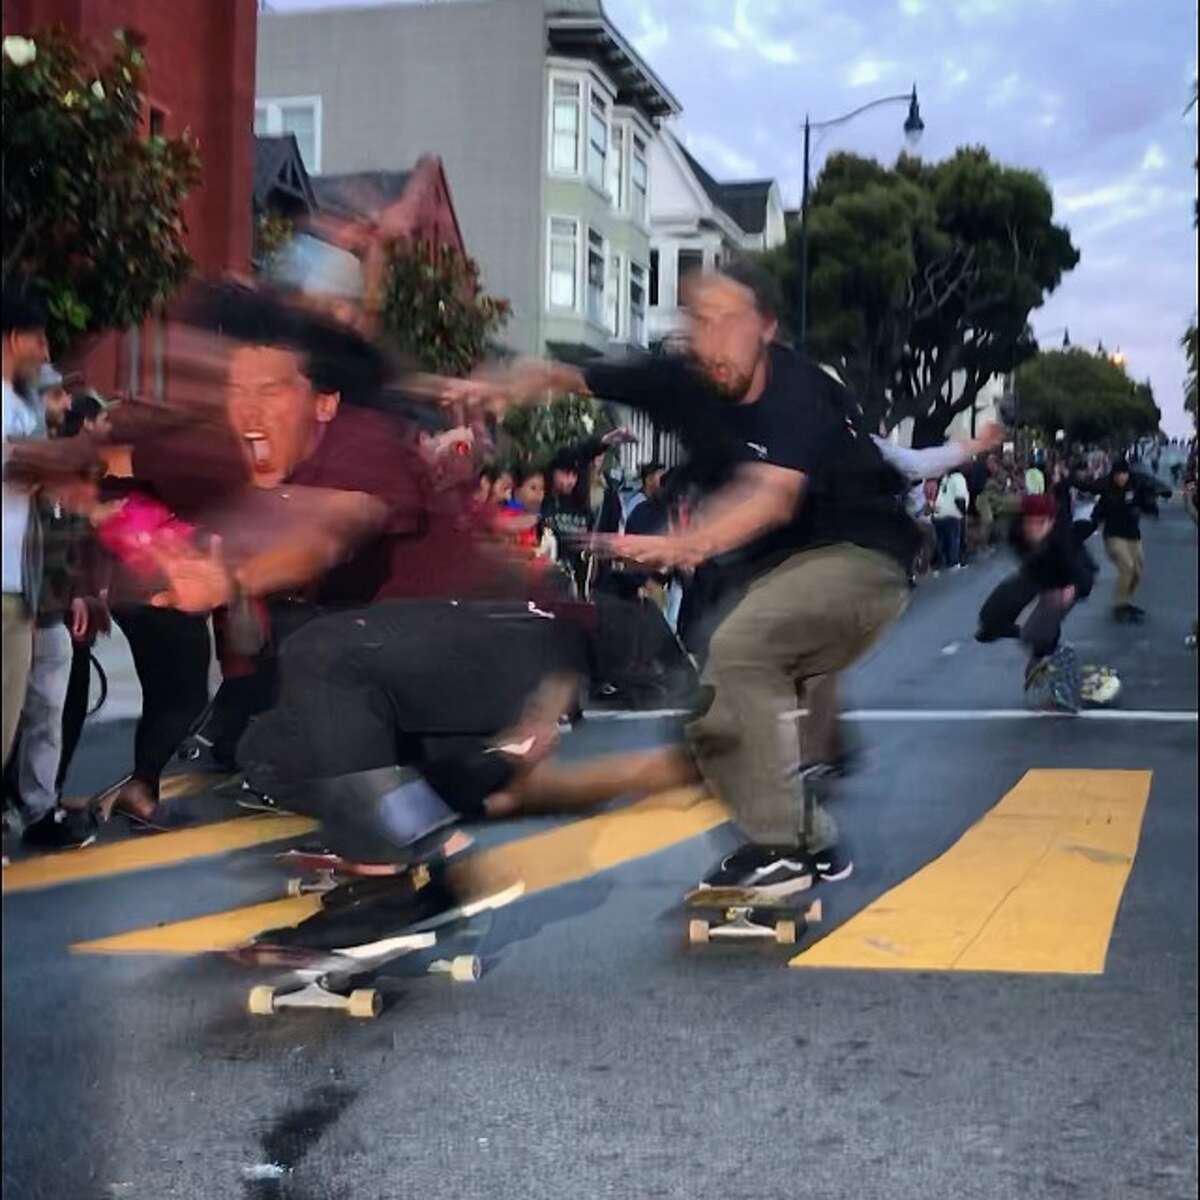 Hundreds of skateboarders take Dolores for flash 'hill bombing' event